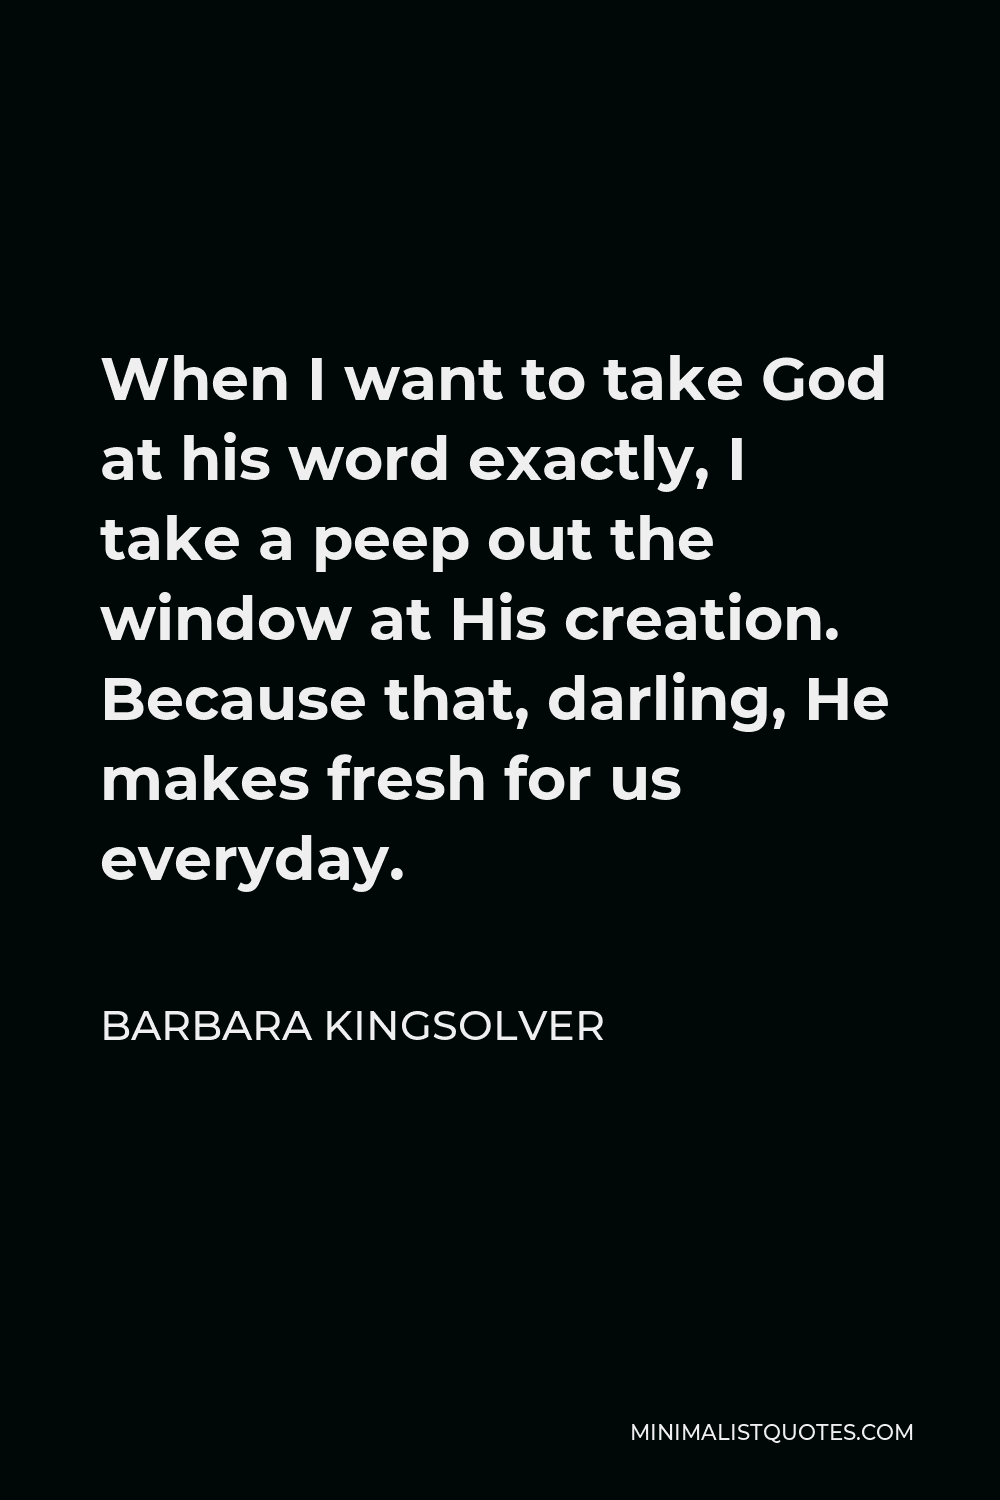 Barbara Kingsolver Quote - When I want to take God at his word exactly, I take a peep out the window at His creation. Because that, darling, He makes fresh for us everyday.